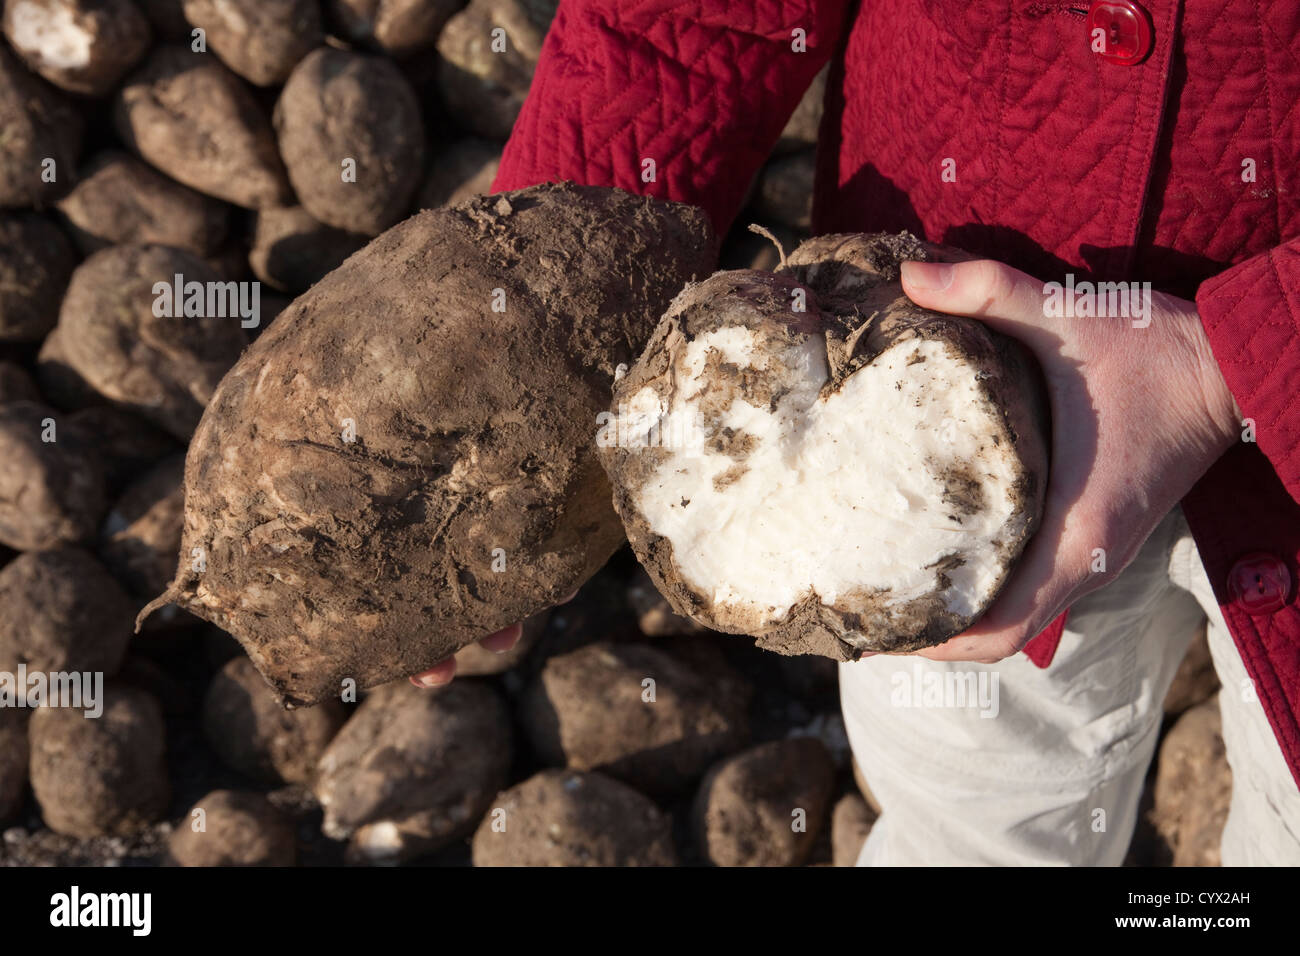 Two Sugar Beets, one split open and another whole, Saginaw County Michigan Fall USA Stock Photo